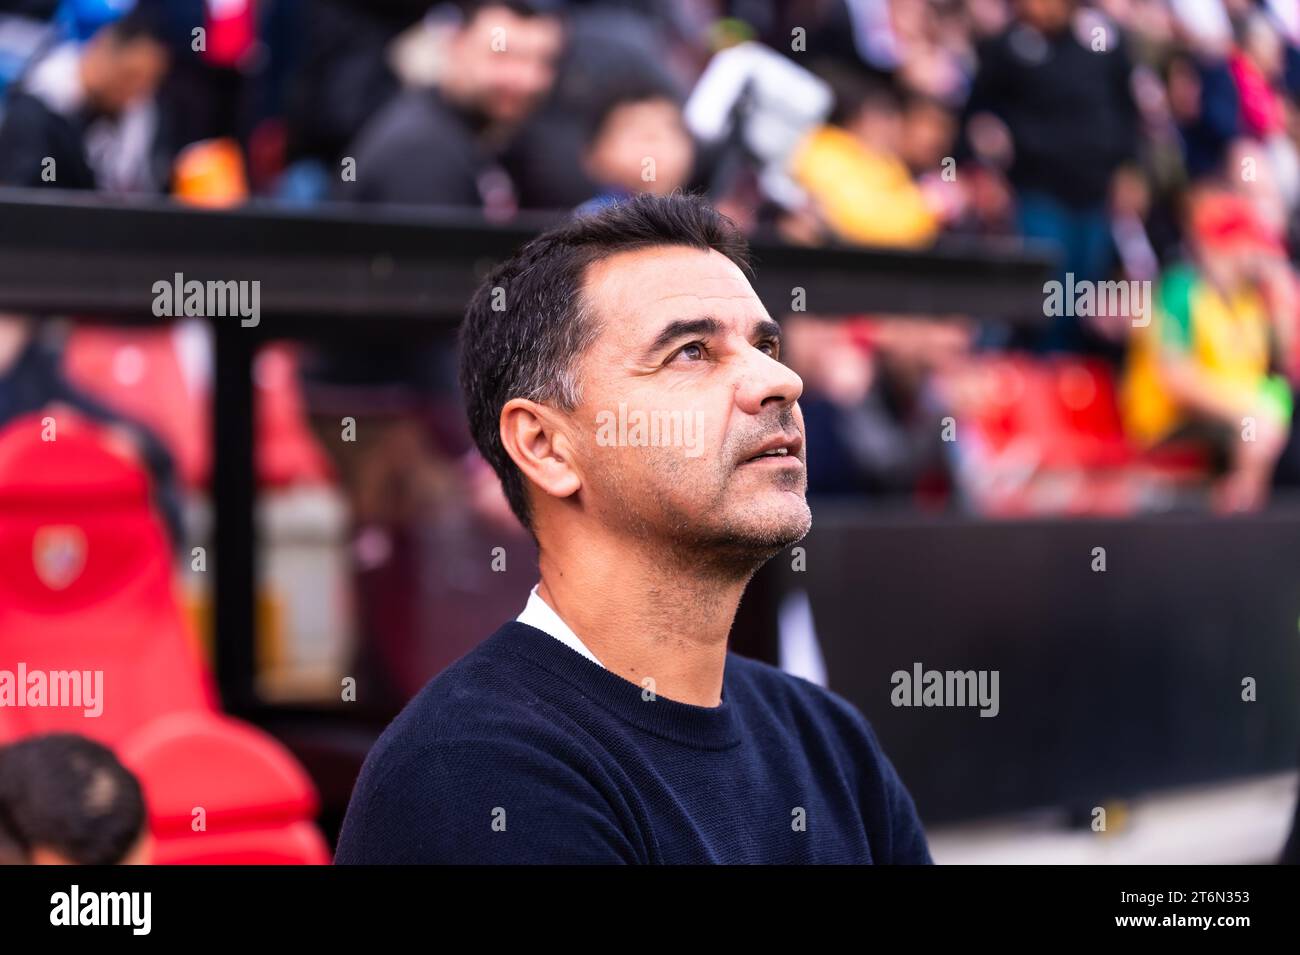 Miguel Angel Sanchez Munoz, better known as Michel, historical figure of Rayo Vallecano and current coach of Girona, seen before the La Liga EA Sports 2022/23 football match between Rayo Vallecano vs Girona at Estadio de Vallecas in Madrid, Spain. Stock Photo